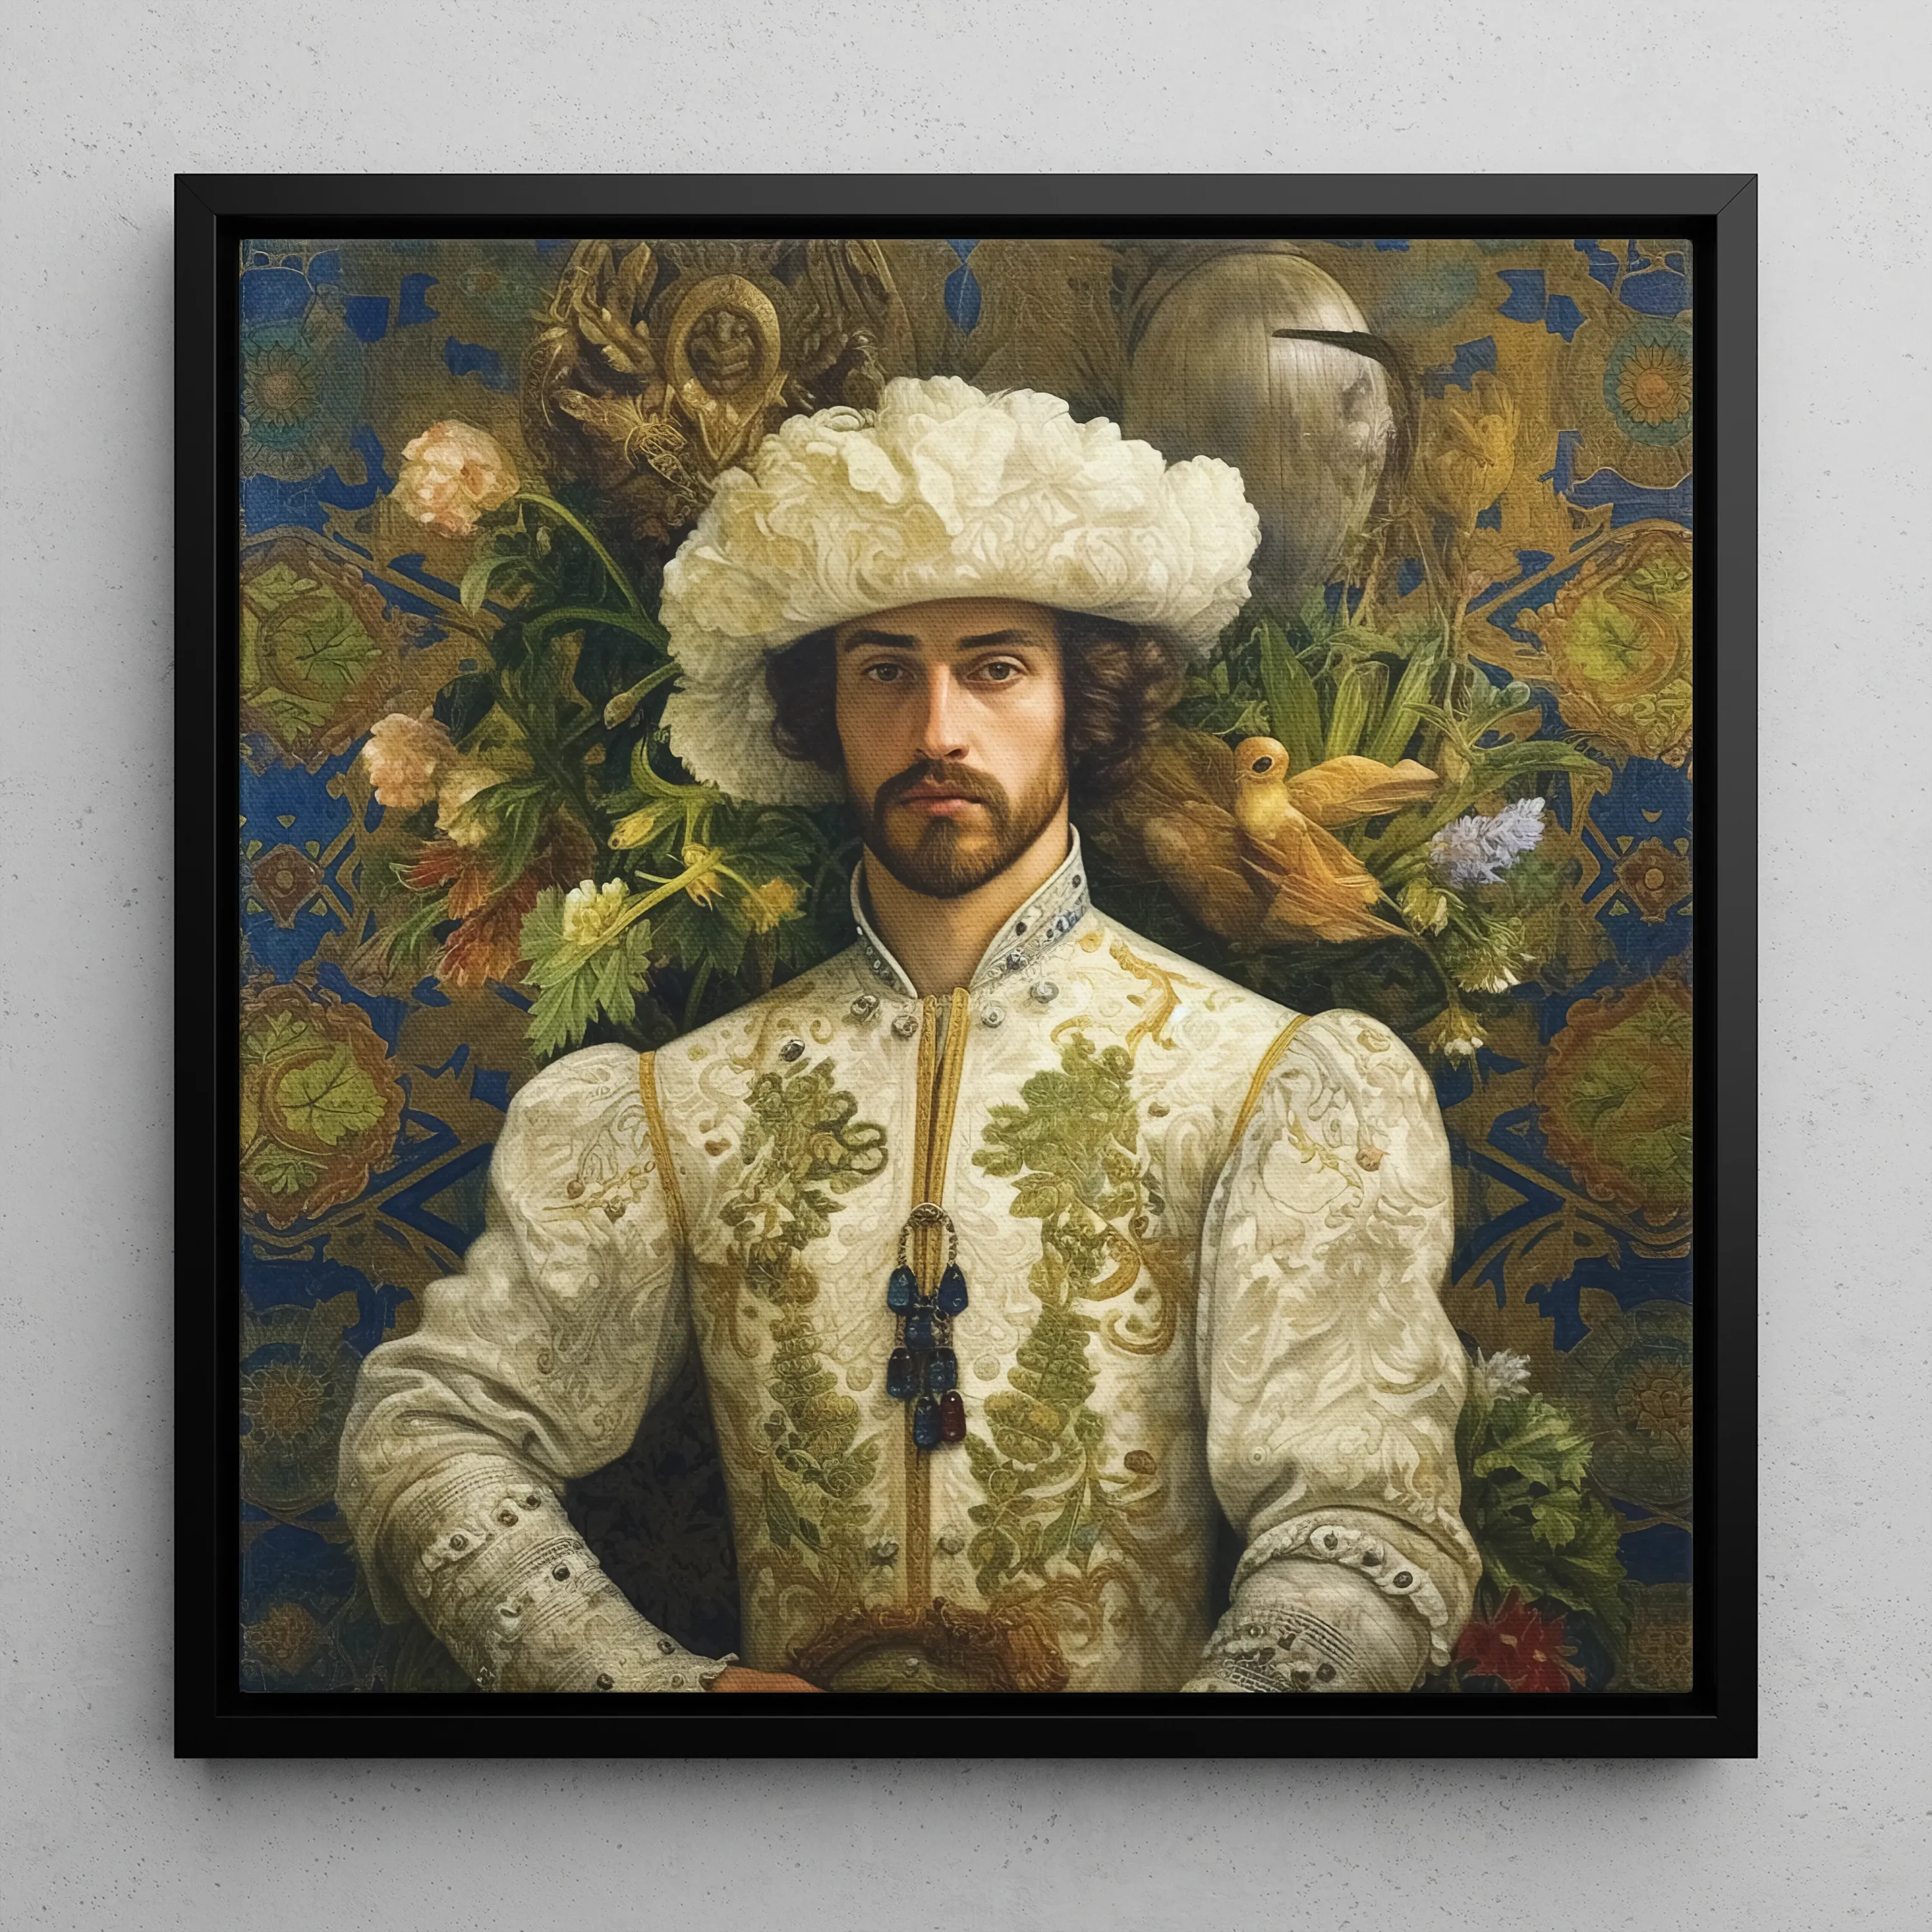 Prince Alfonso - Gay Spanish Royalty Queerart Framed Canvas - 16’x16’ - Posters Prints & Visual Artwork - Aesthetic Art